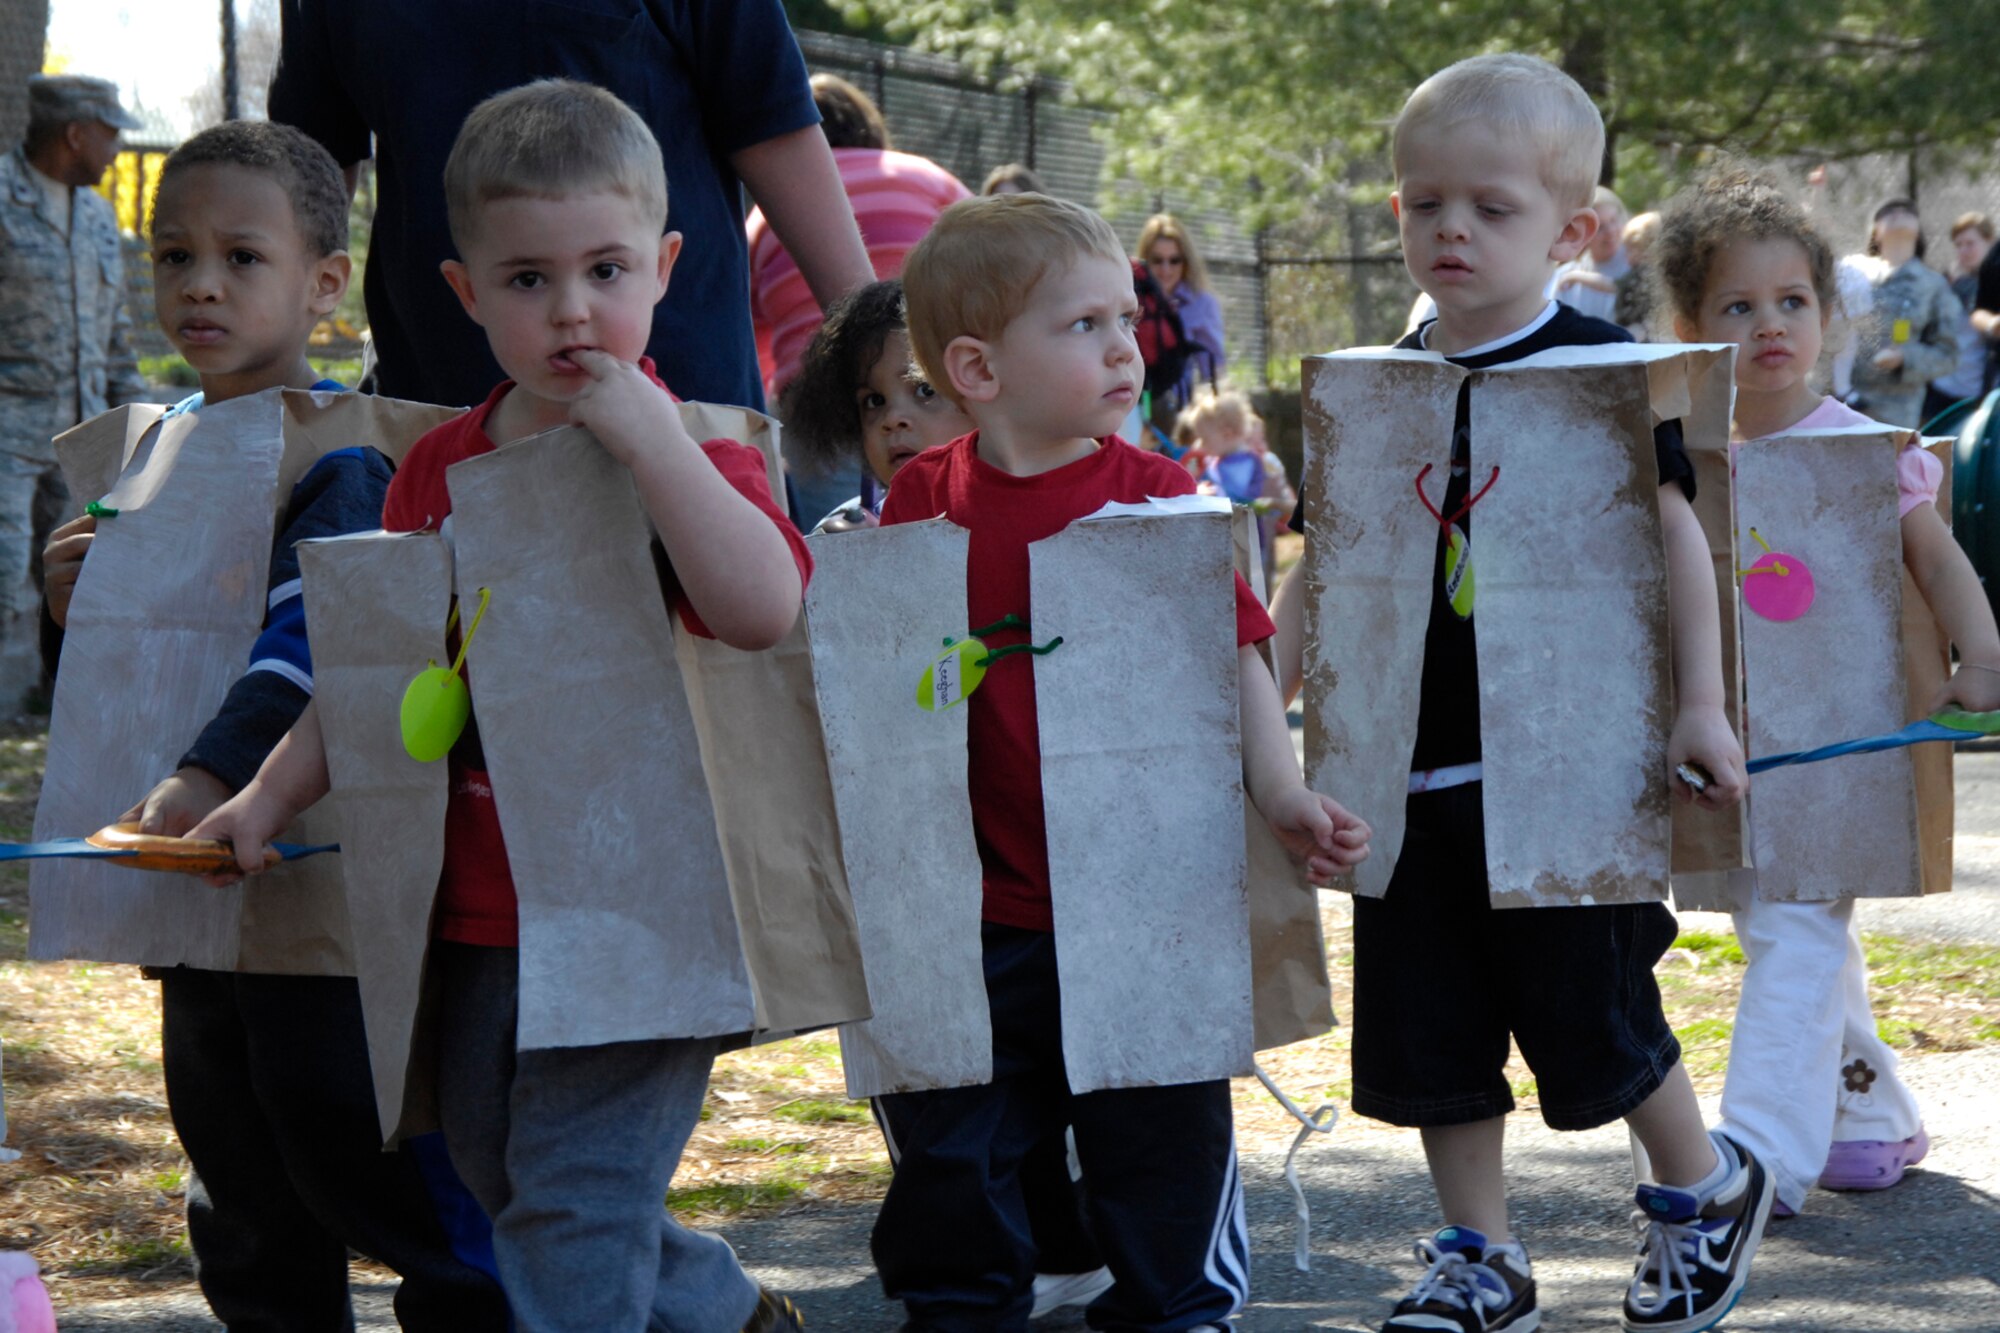 HANSCOM AIR FORCE BASE, Mass. – Hand in hand students dressed as dogs march to the beat of “Who Let the Dogs Out” during the Hanscom Child Development Center’s Fantastic Floats parade, April 24. (U.S. Air Force photo by Linda LaBonte Britt)